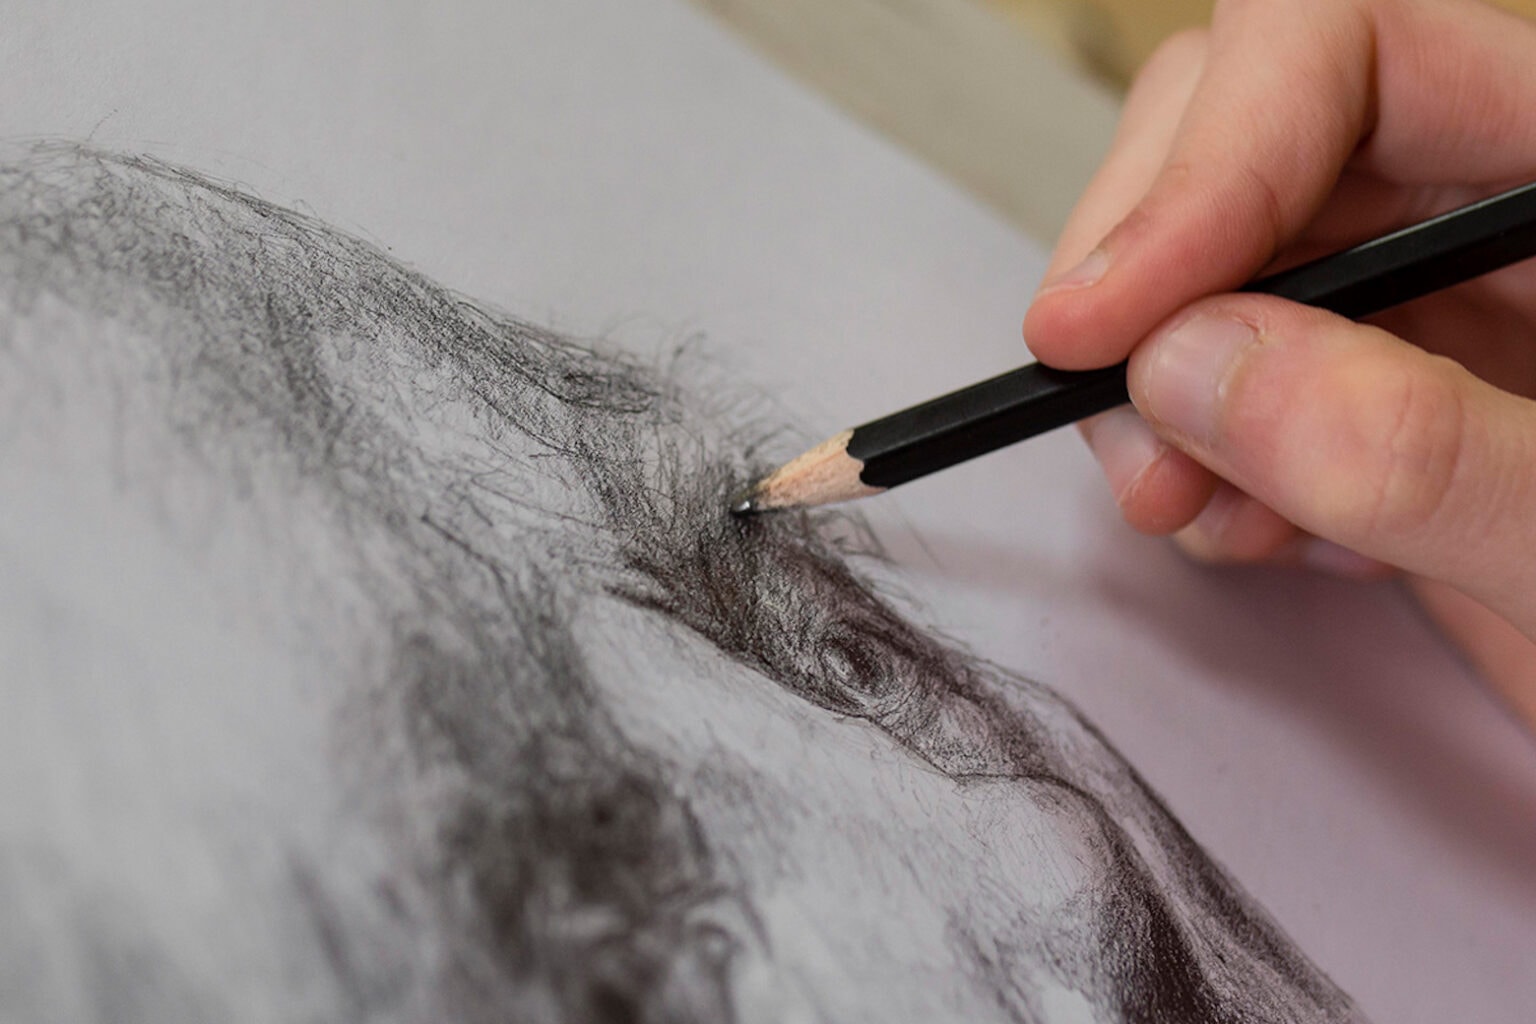 Lifetime access to nearly 100 lessons on drawing can help turn your hobby into a career.